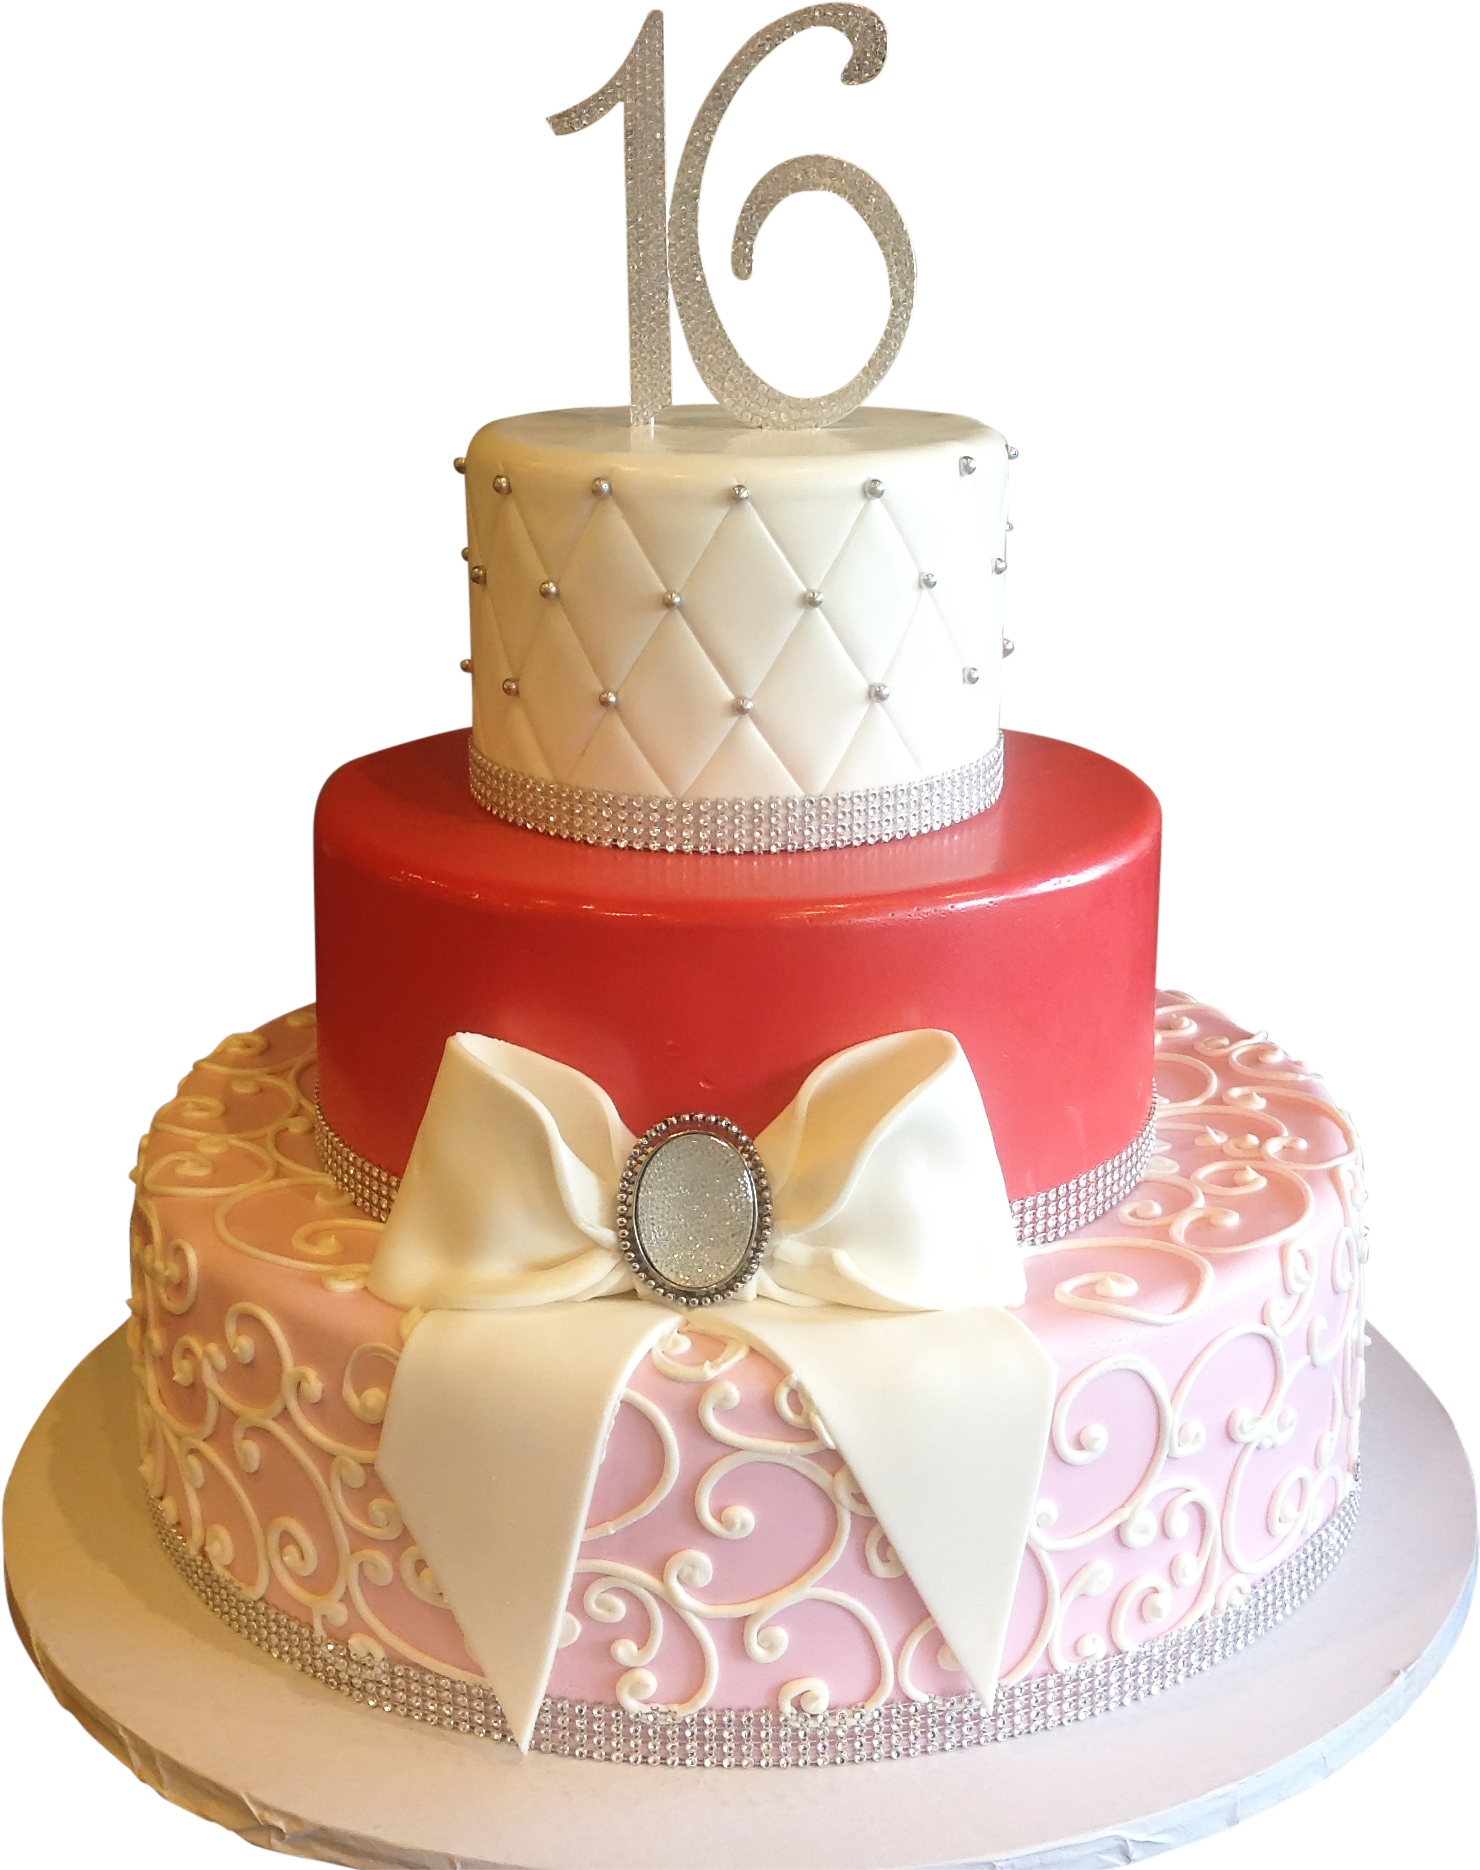 Nice Toddler Girl Birthday Cakes About Newest Cake - Nice Toddler Girl Birthday Cakes About Newest Cake (1936x1936)